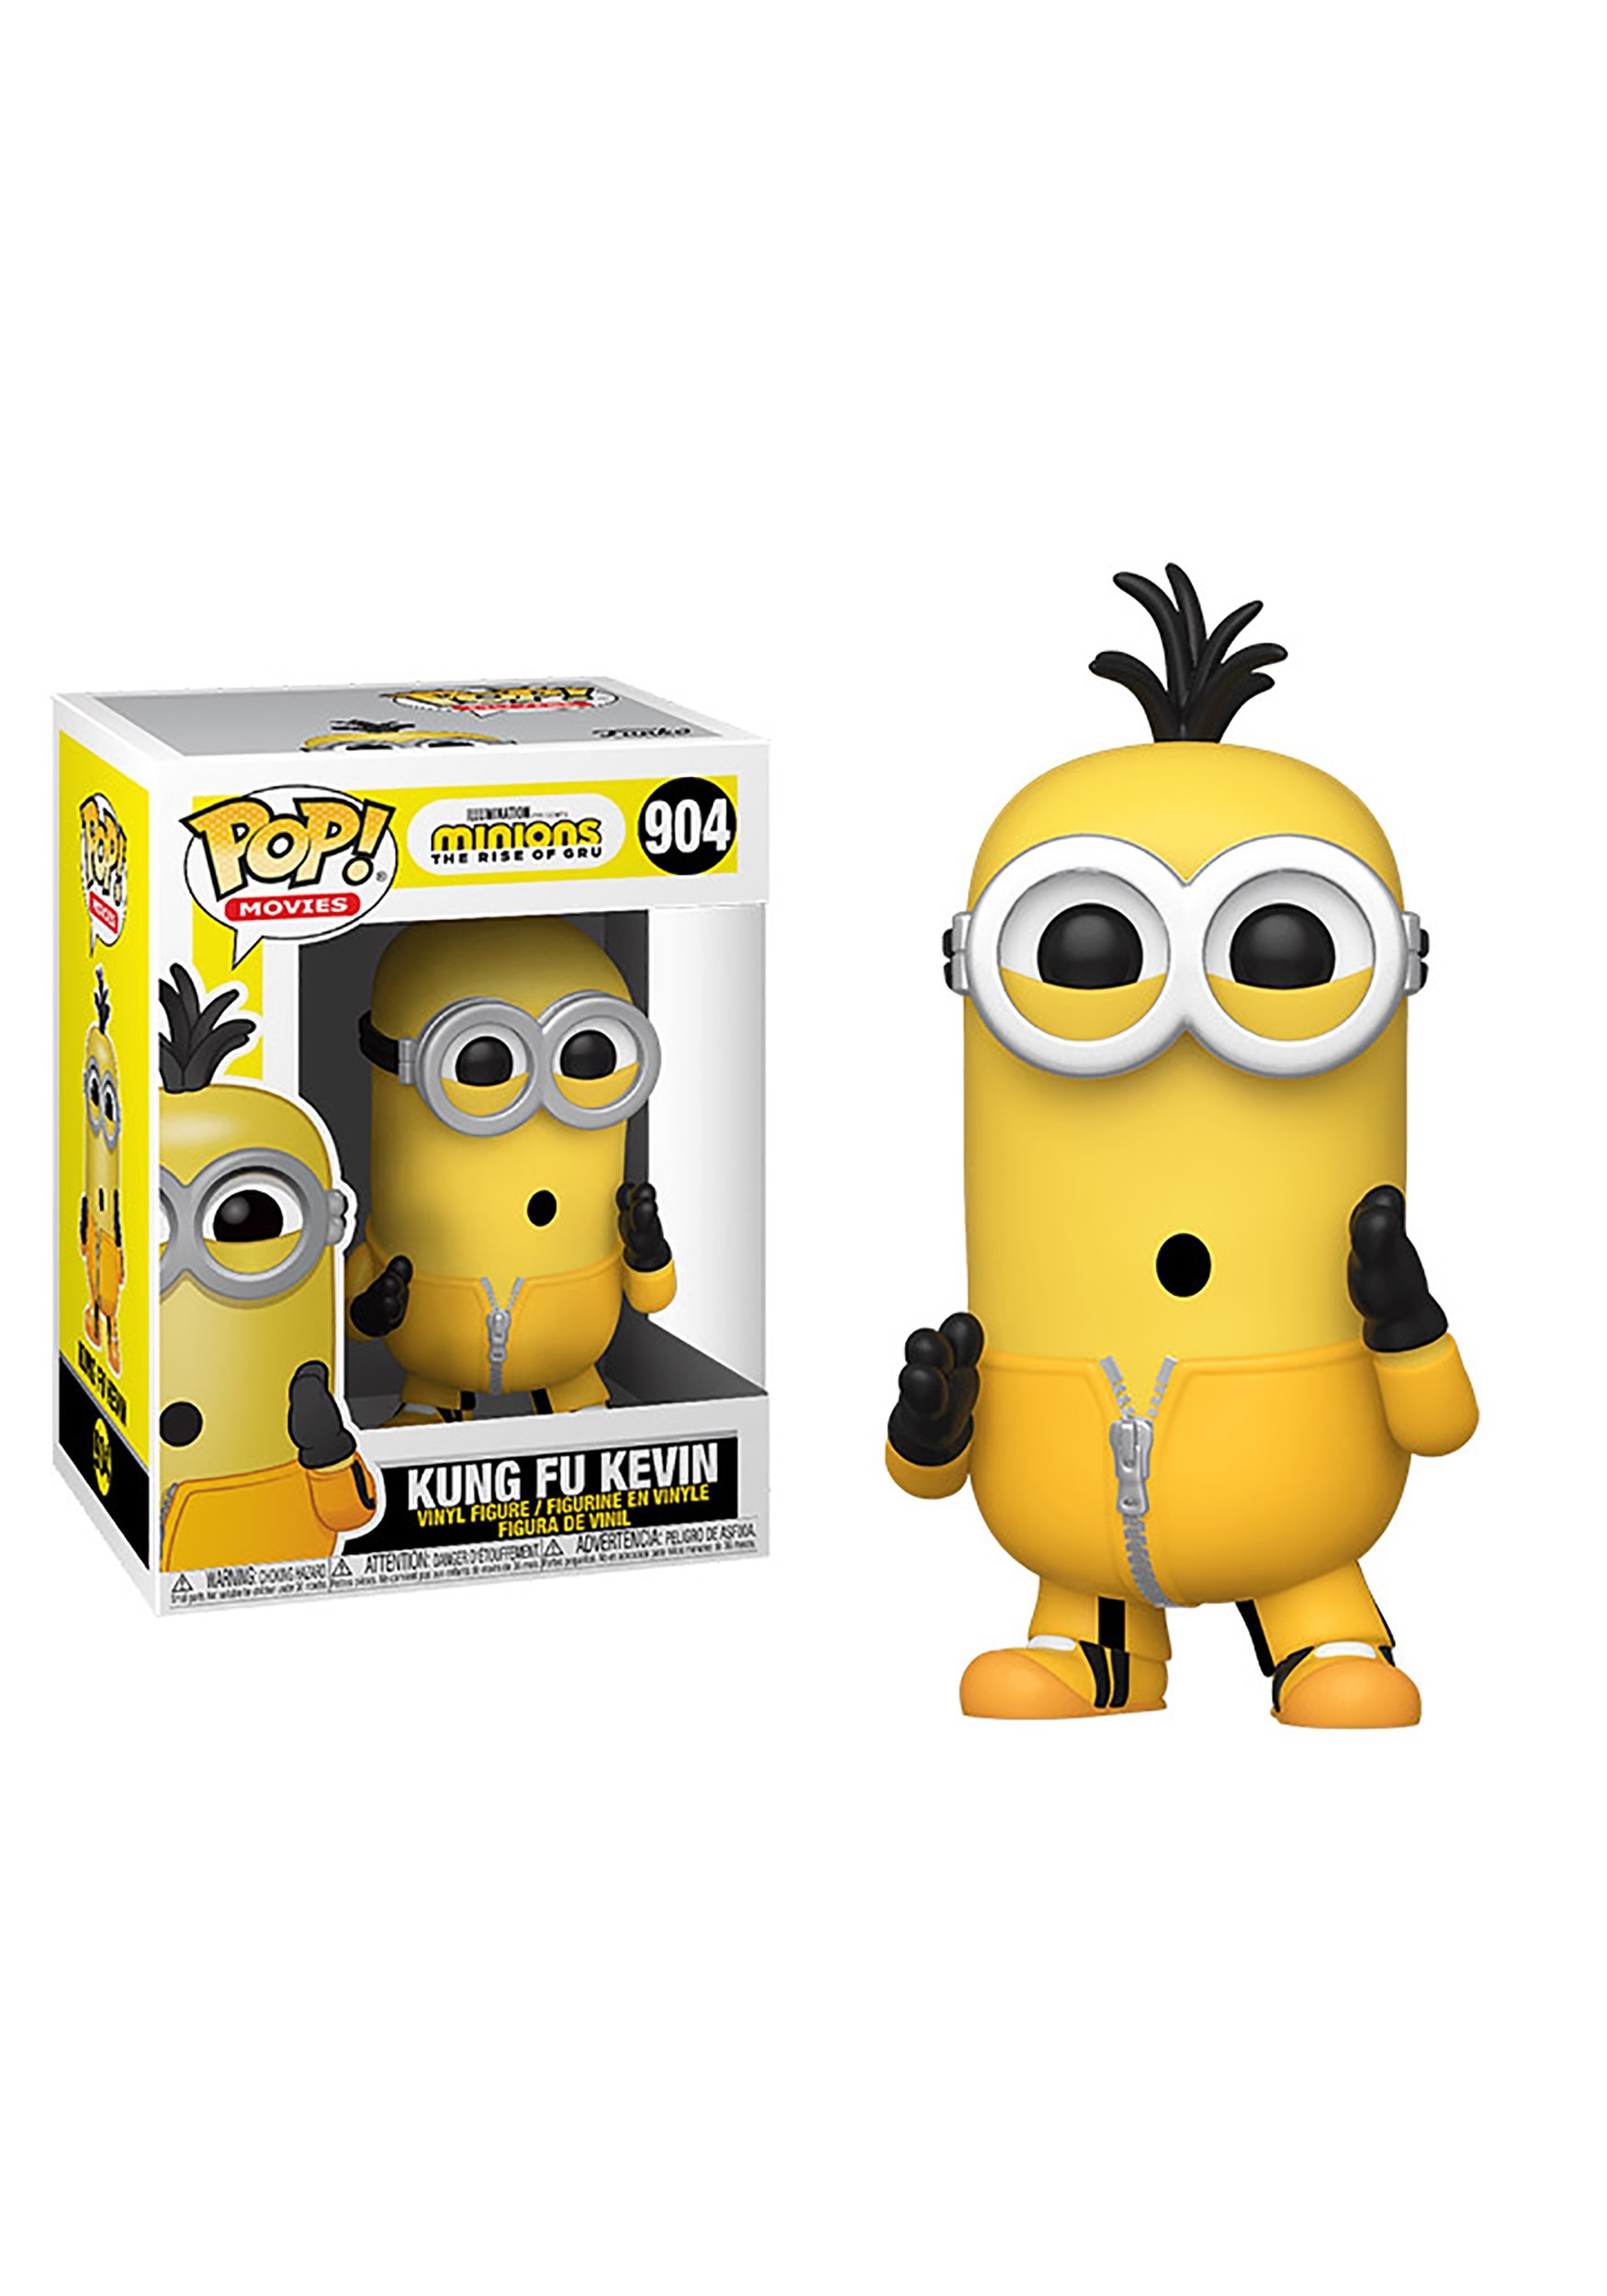 Kung Fu Kevin - Minions: The Rise of Gru Funko POP